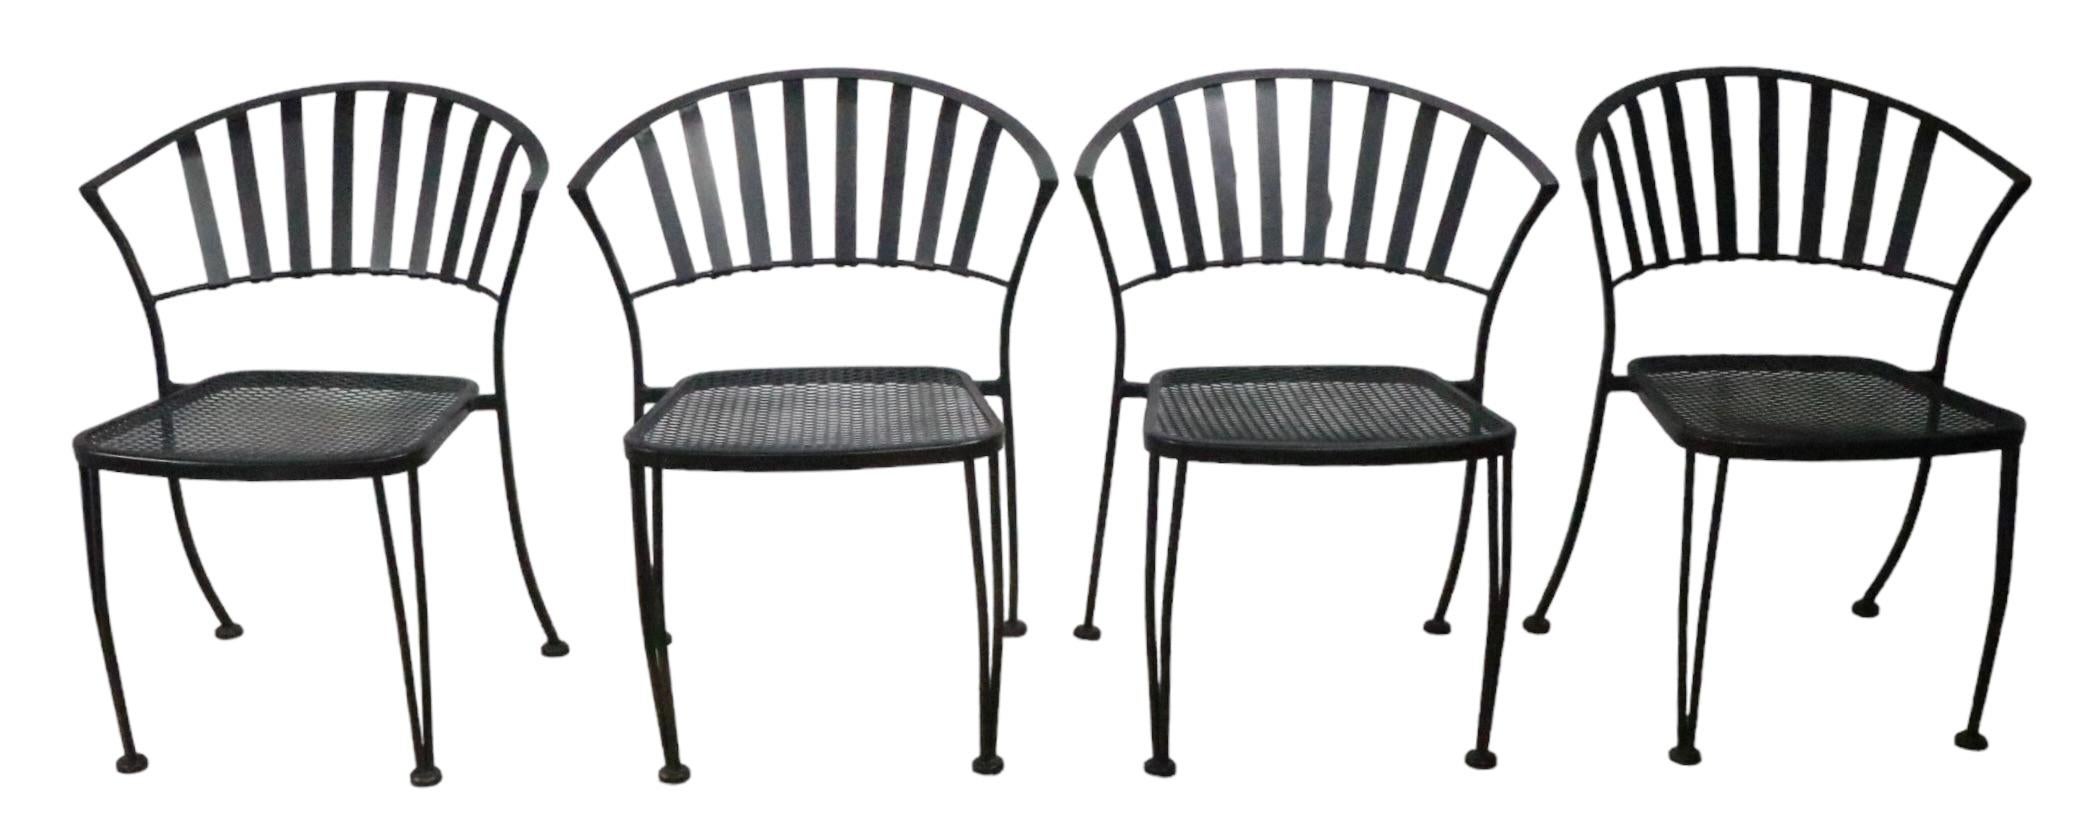 Set of Four Vintage Garden Patio Poolside Metal Strap Dining Chairs For Sale 1